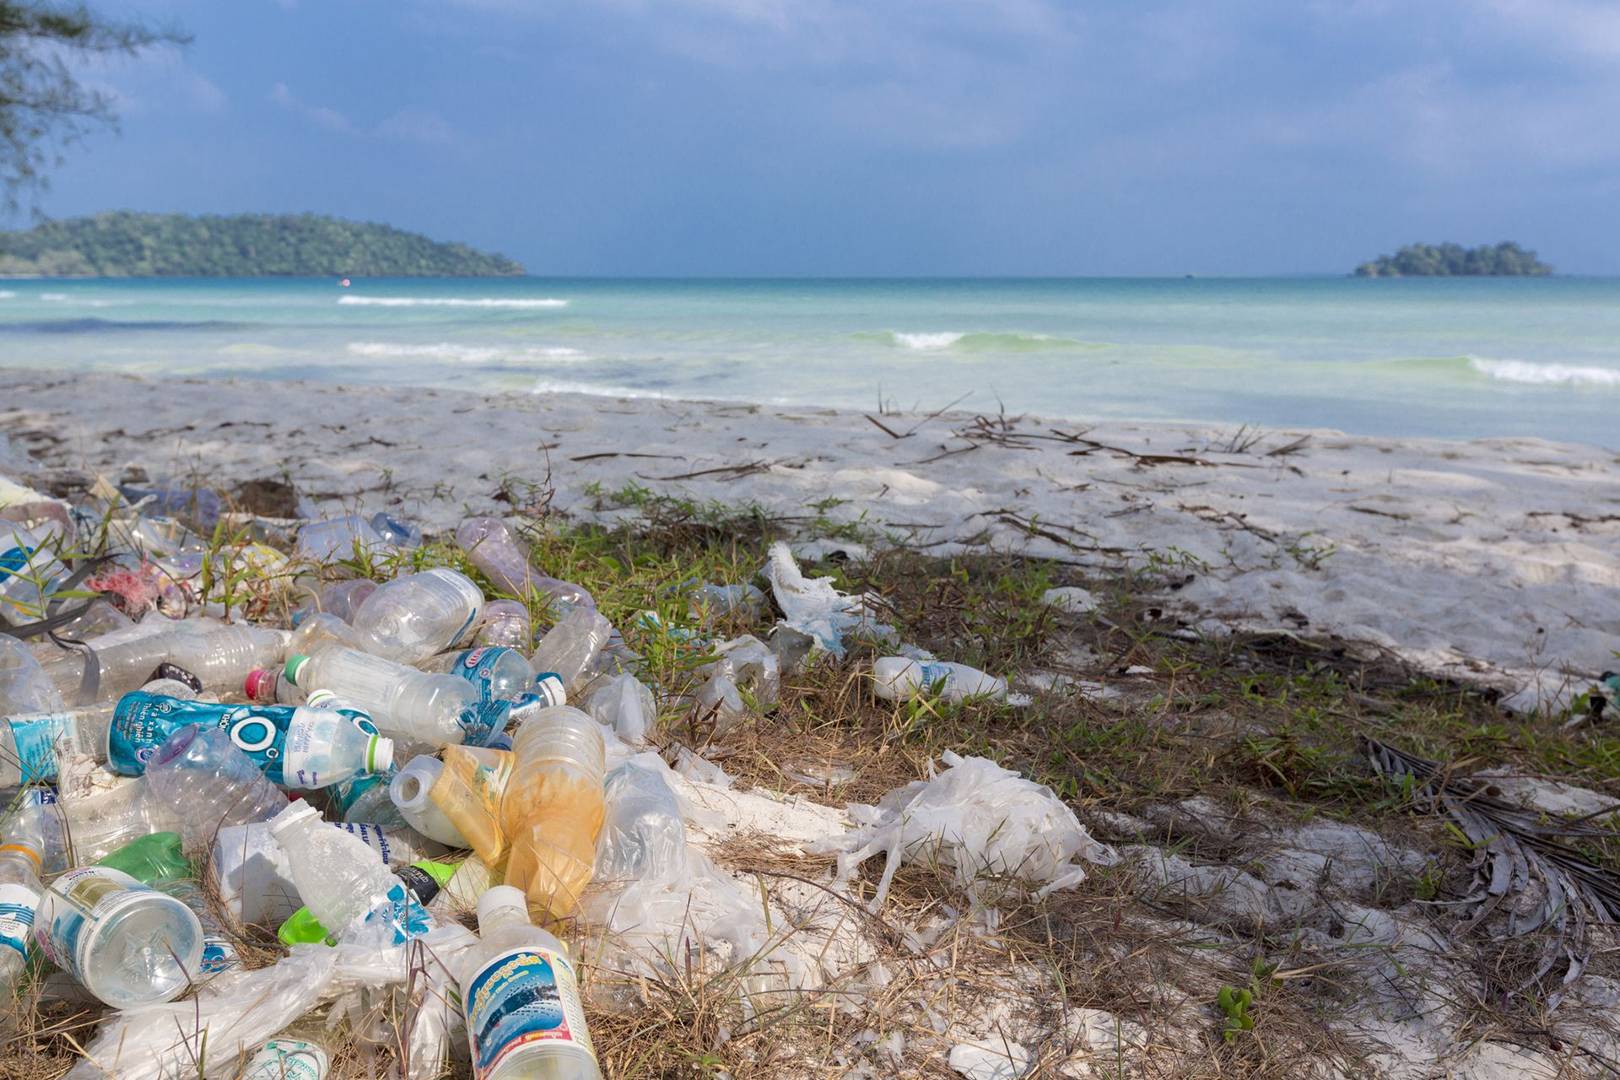 Sky's Ocean Rescue campaign wants to tackle plastic pollution